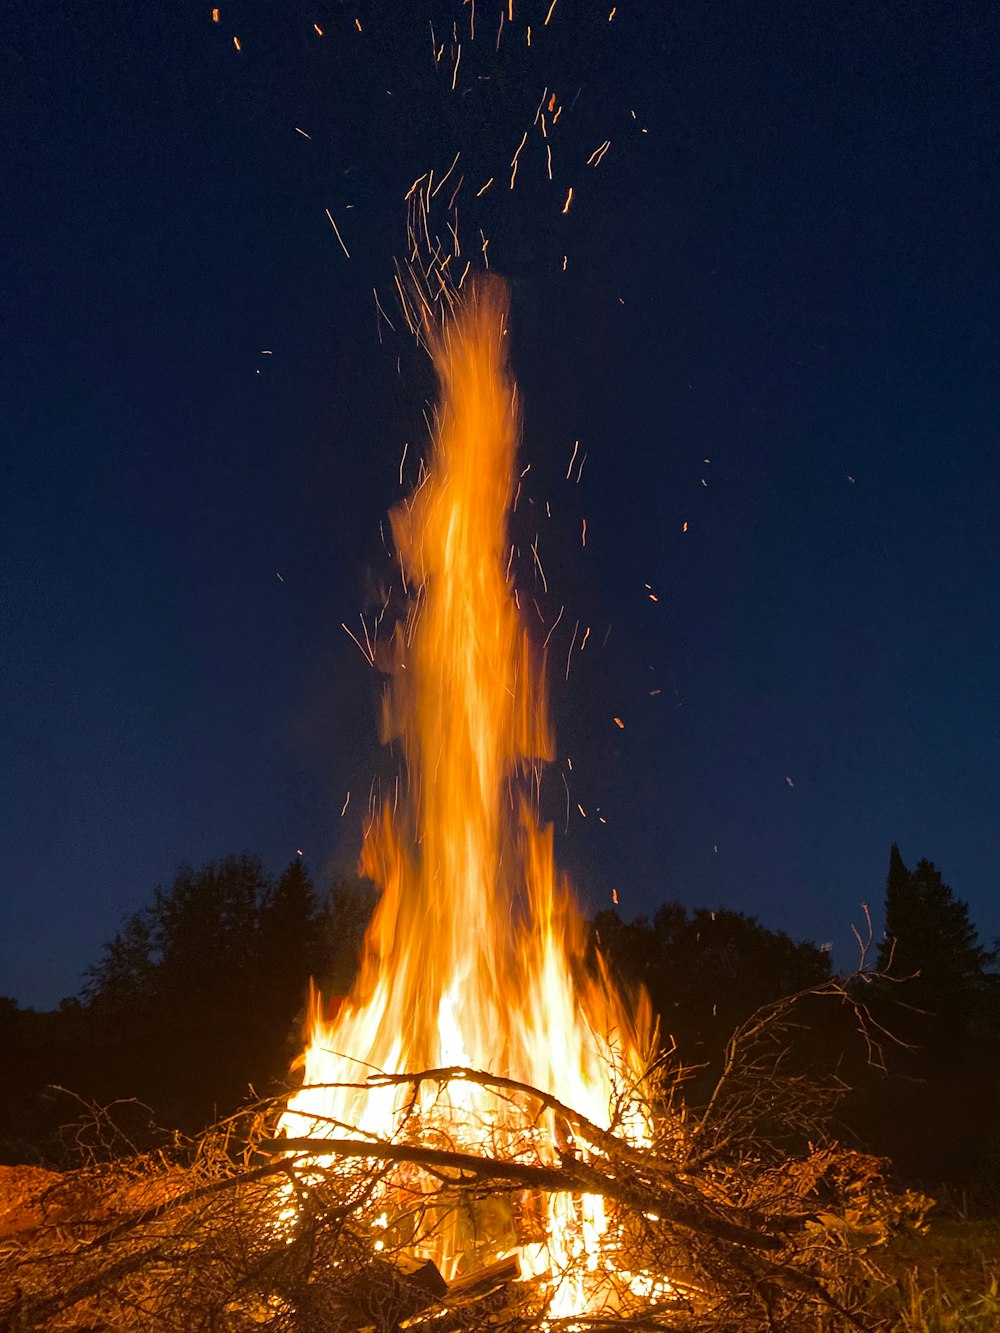 a fire is lit in a field at night